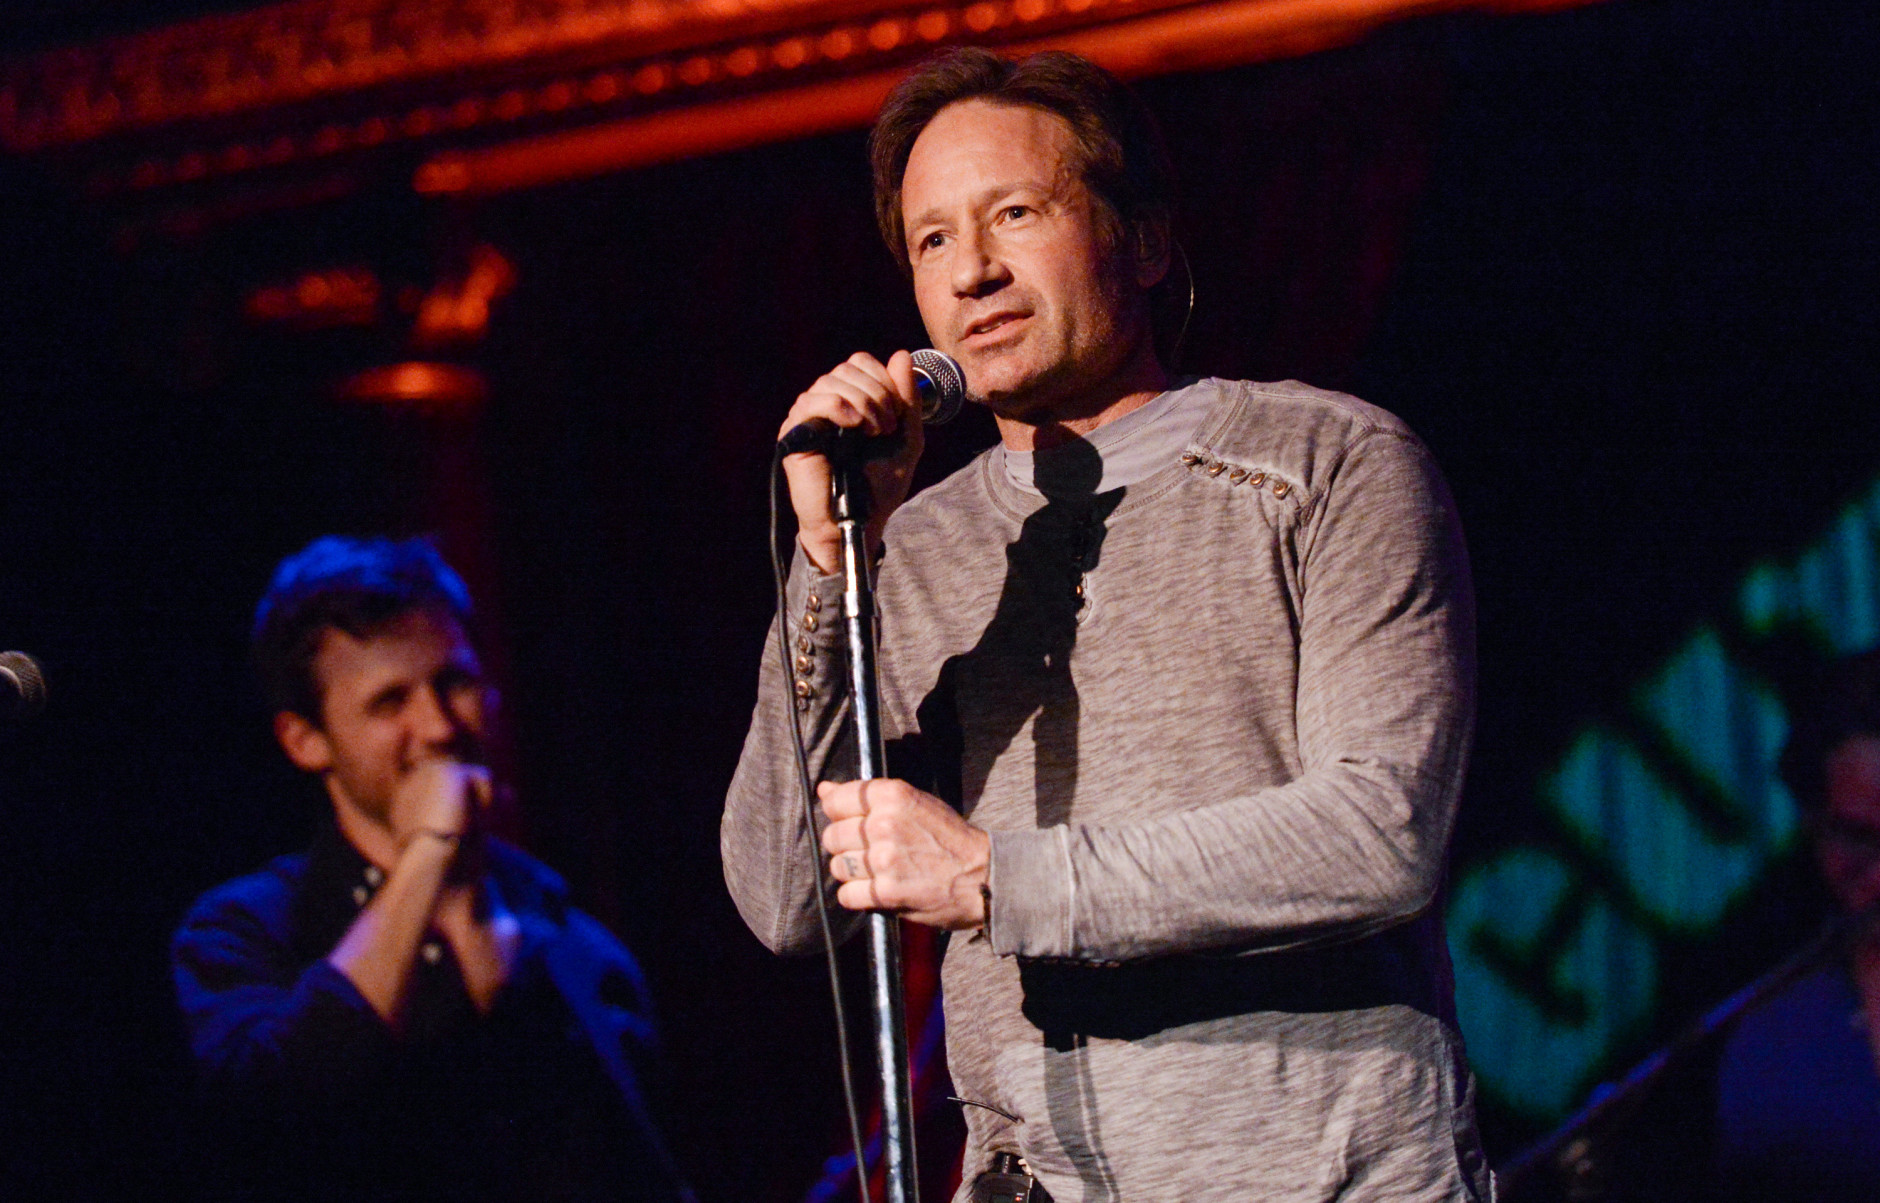 Actor David Duchovny is 55 on Aug. 7. Here, Duchovny performs at The Cutting Room, in support of the release of his debut album "Hell Or Highwater," on Tuesday, May 12, 2015, in New York. (Photo by Evan Agostini/Invision/AP)